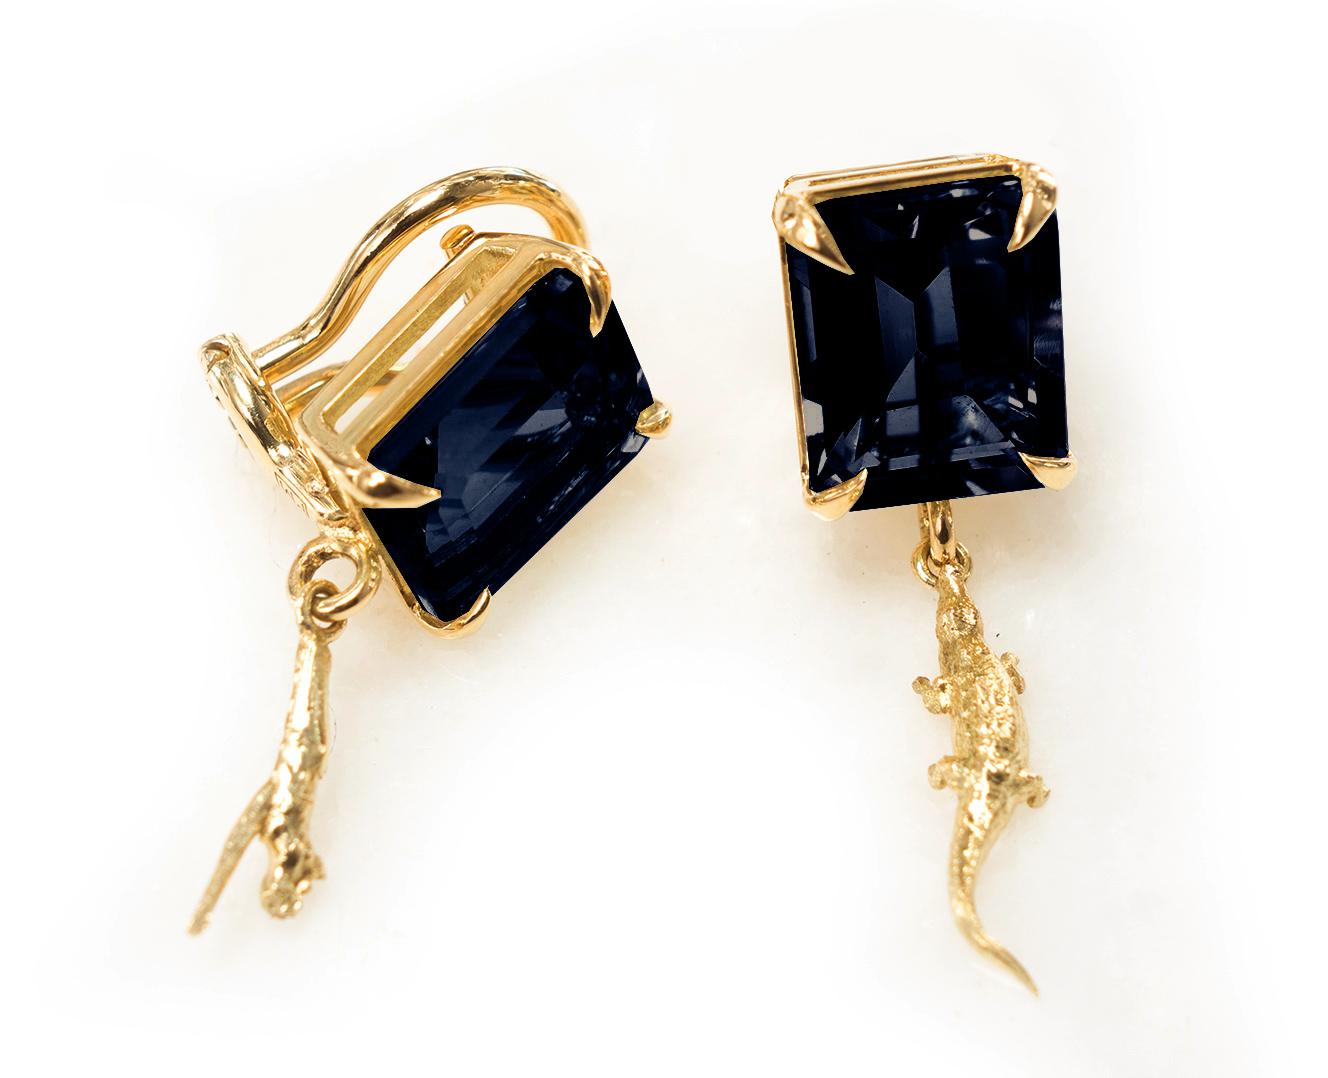 These contemporary stud earrings with natural sapphires (octagon cut) belong to Tea collection, which was featured in Vogue UA published issue. These earrings are made of 18 karat yellow gold and designed by the oil painter from Berlin, Polya